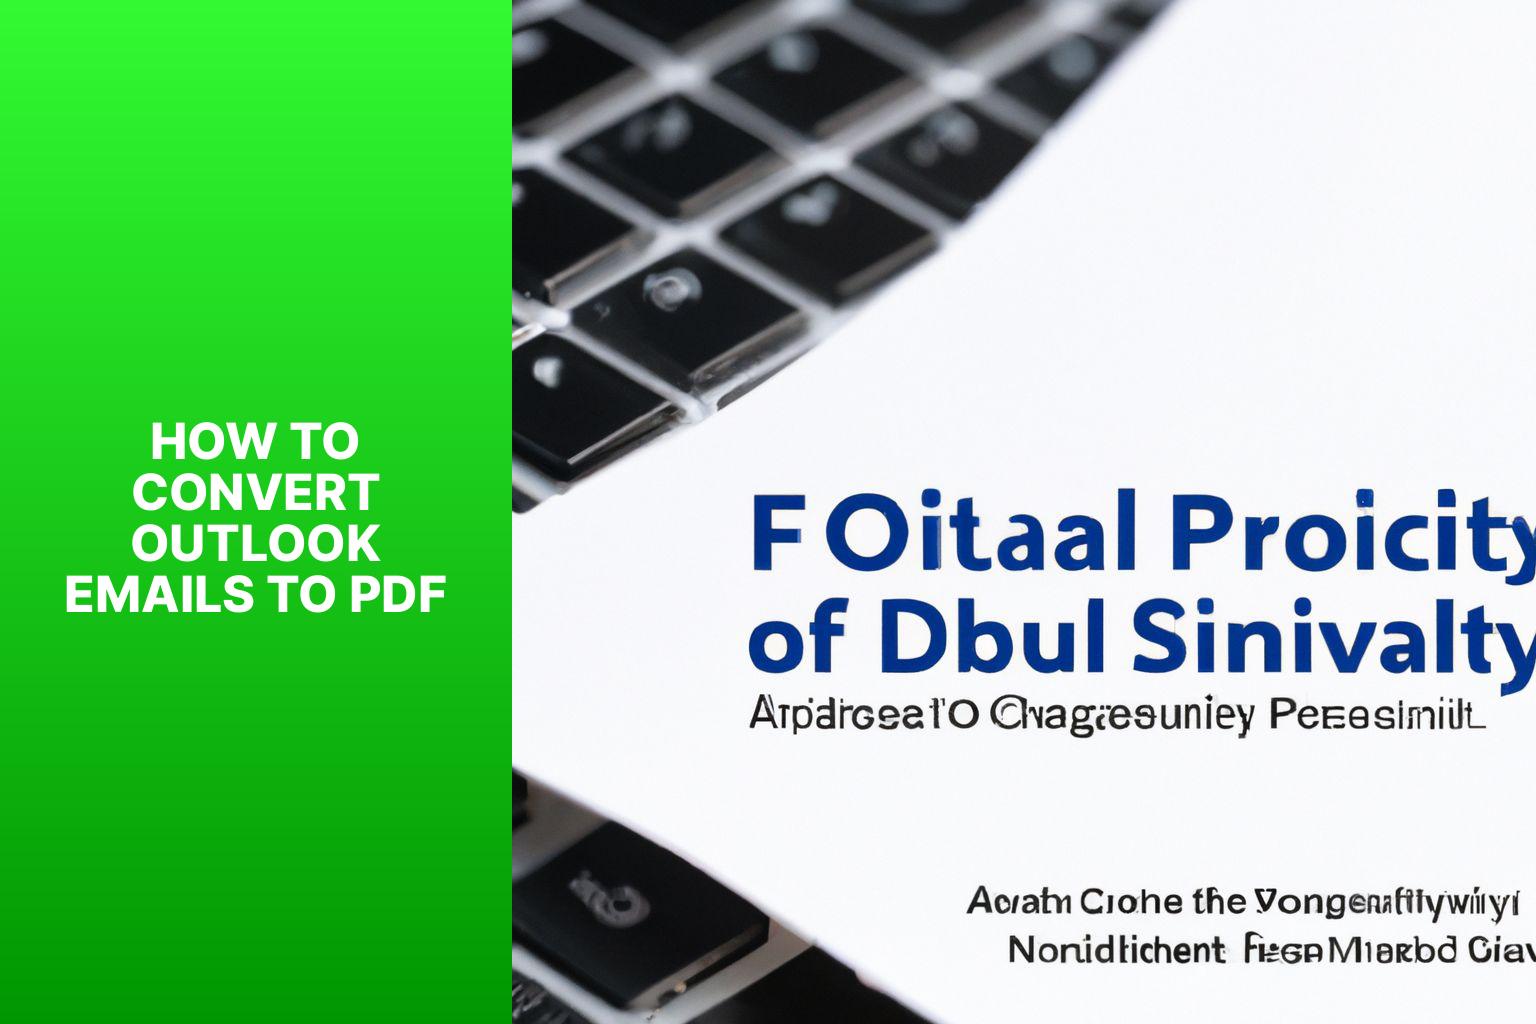 outlook emails to pdf how to convert outlook emails to pdfu0v0